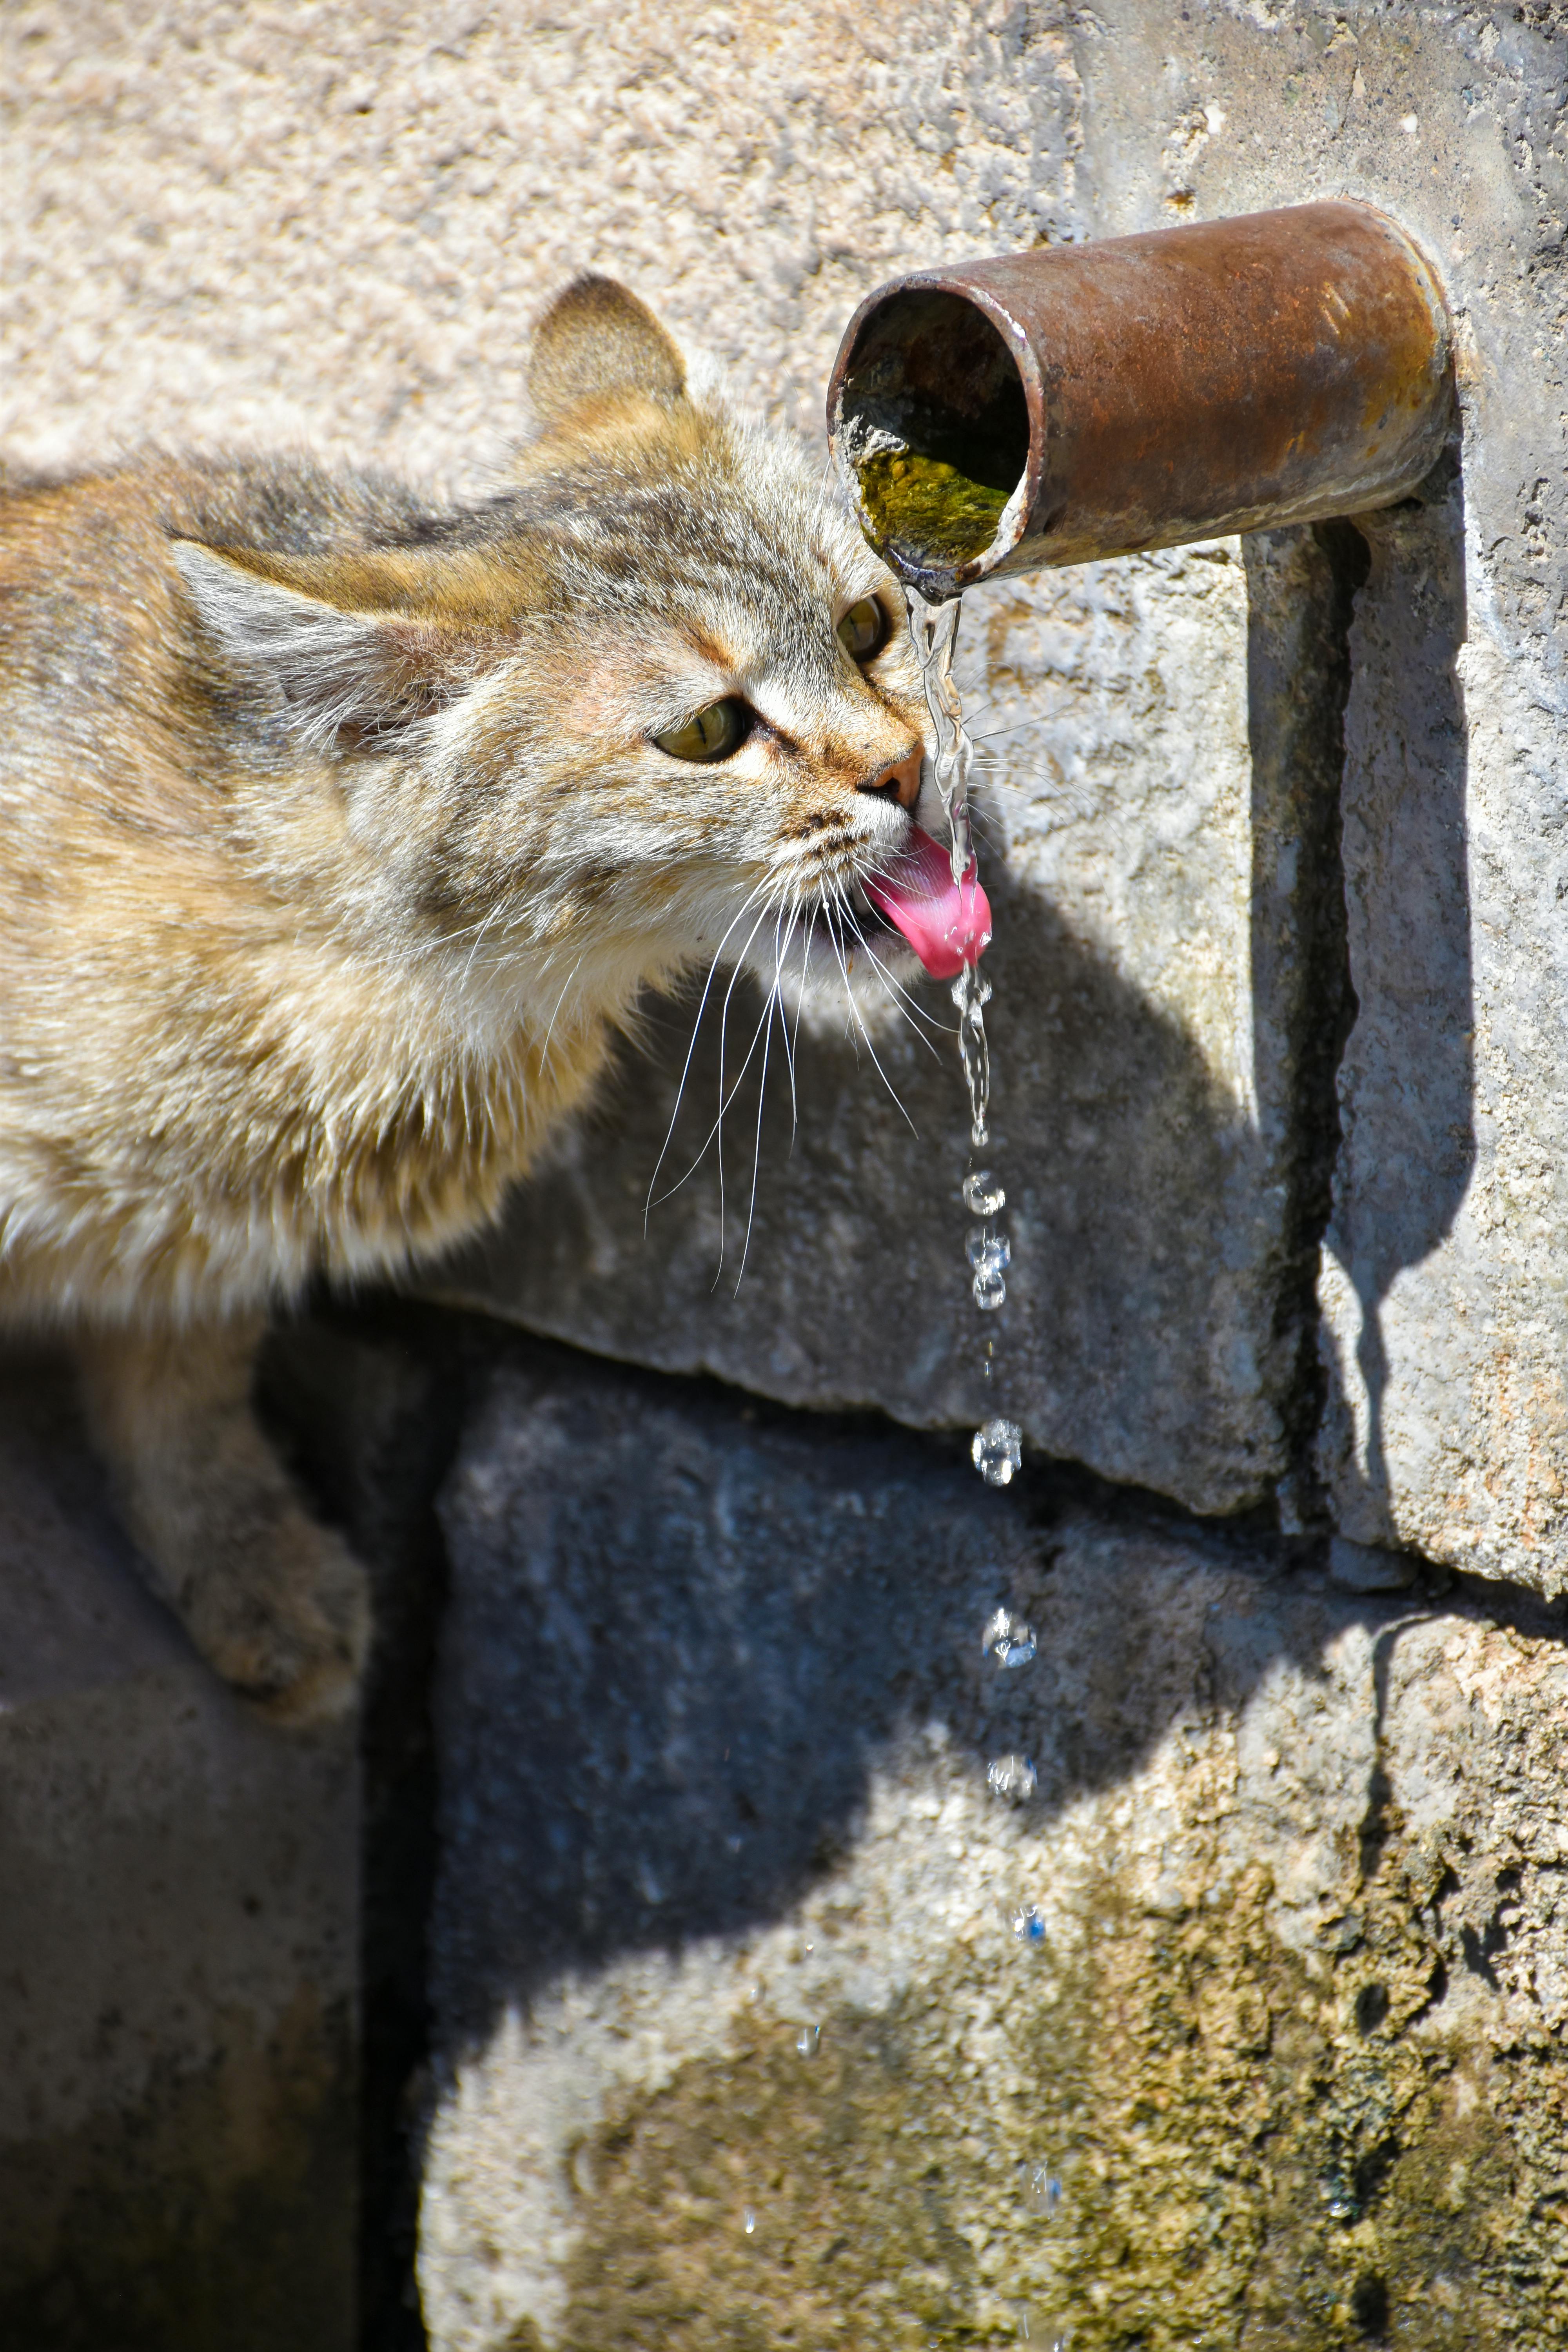 Free stock photo of #cat #water #fountain #nature #shadows